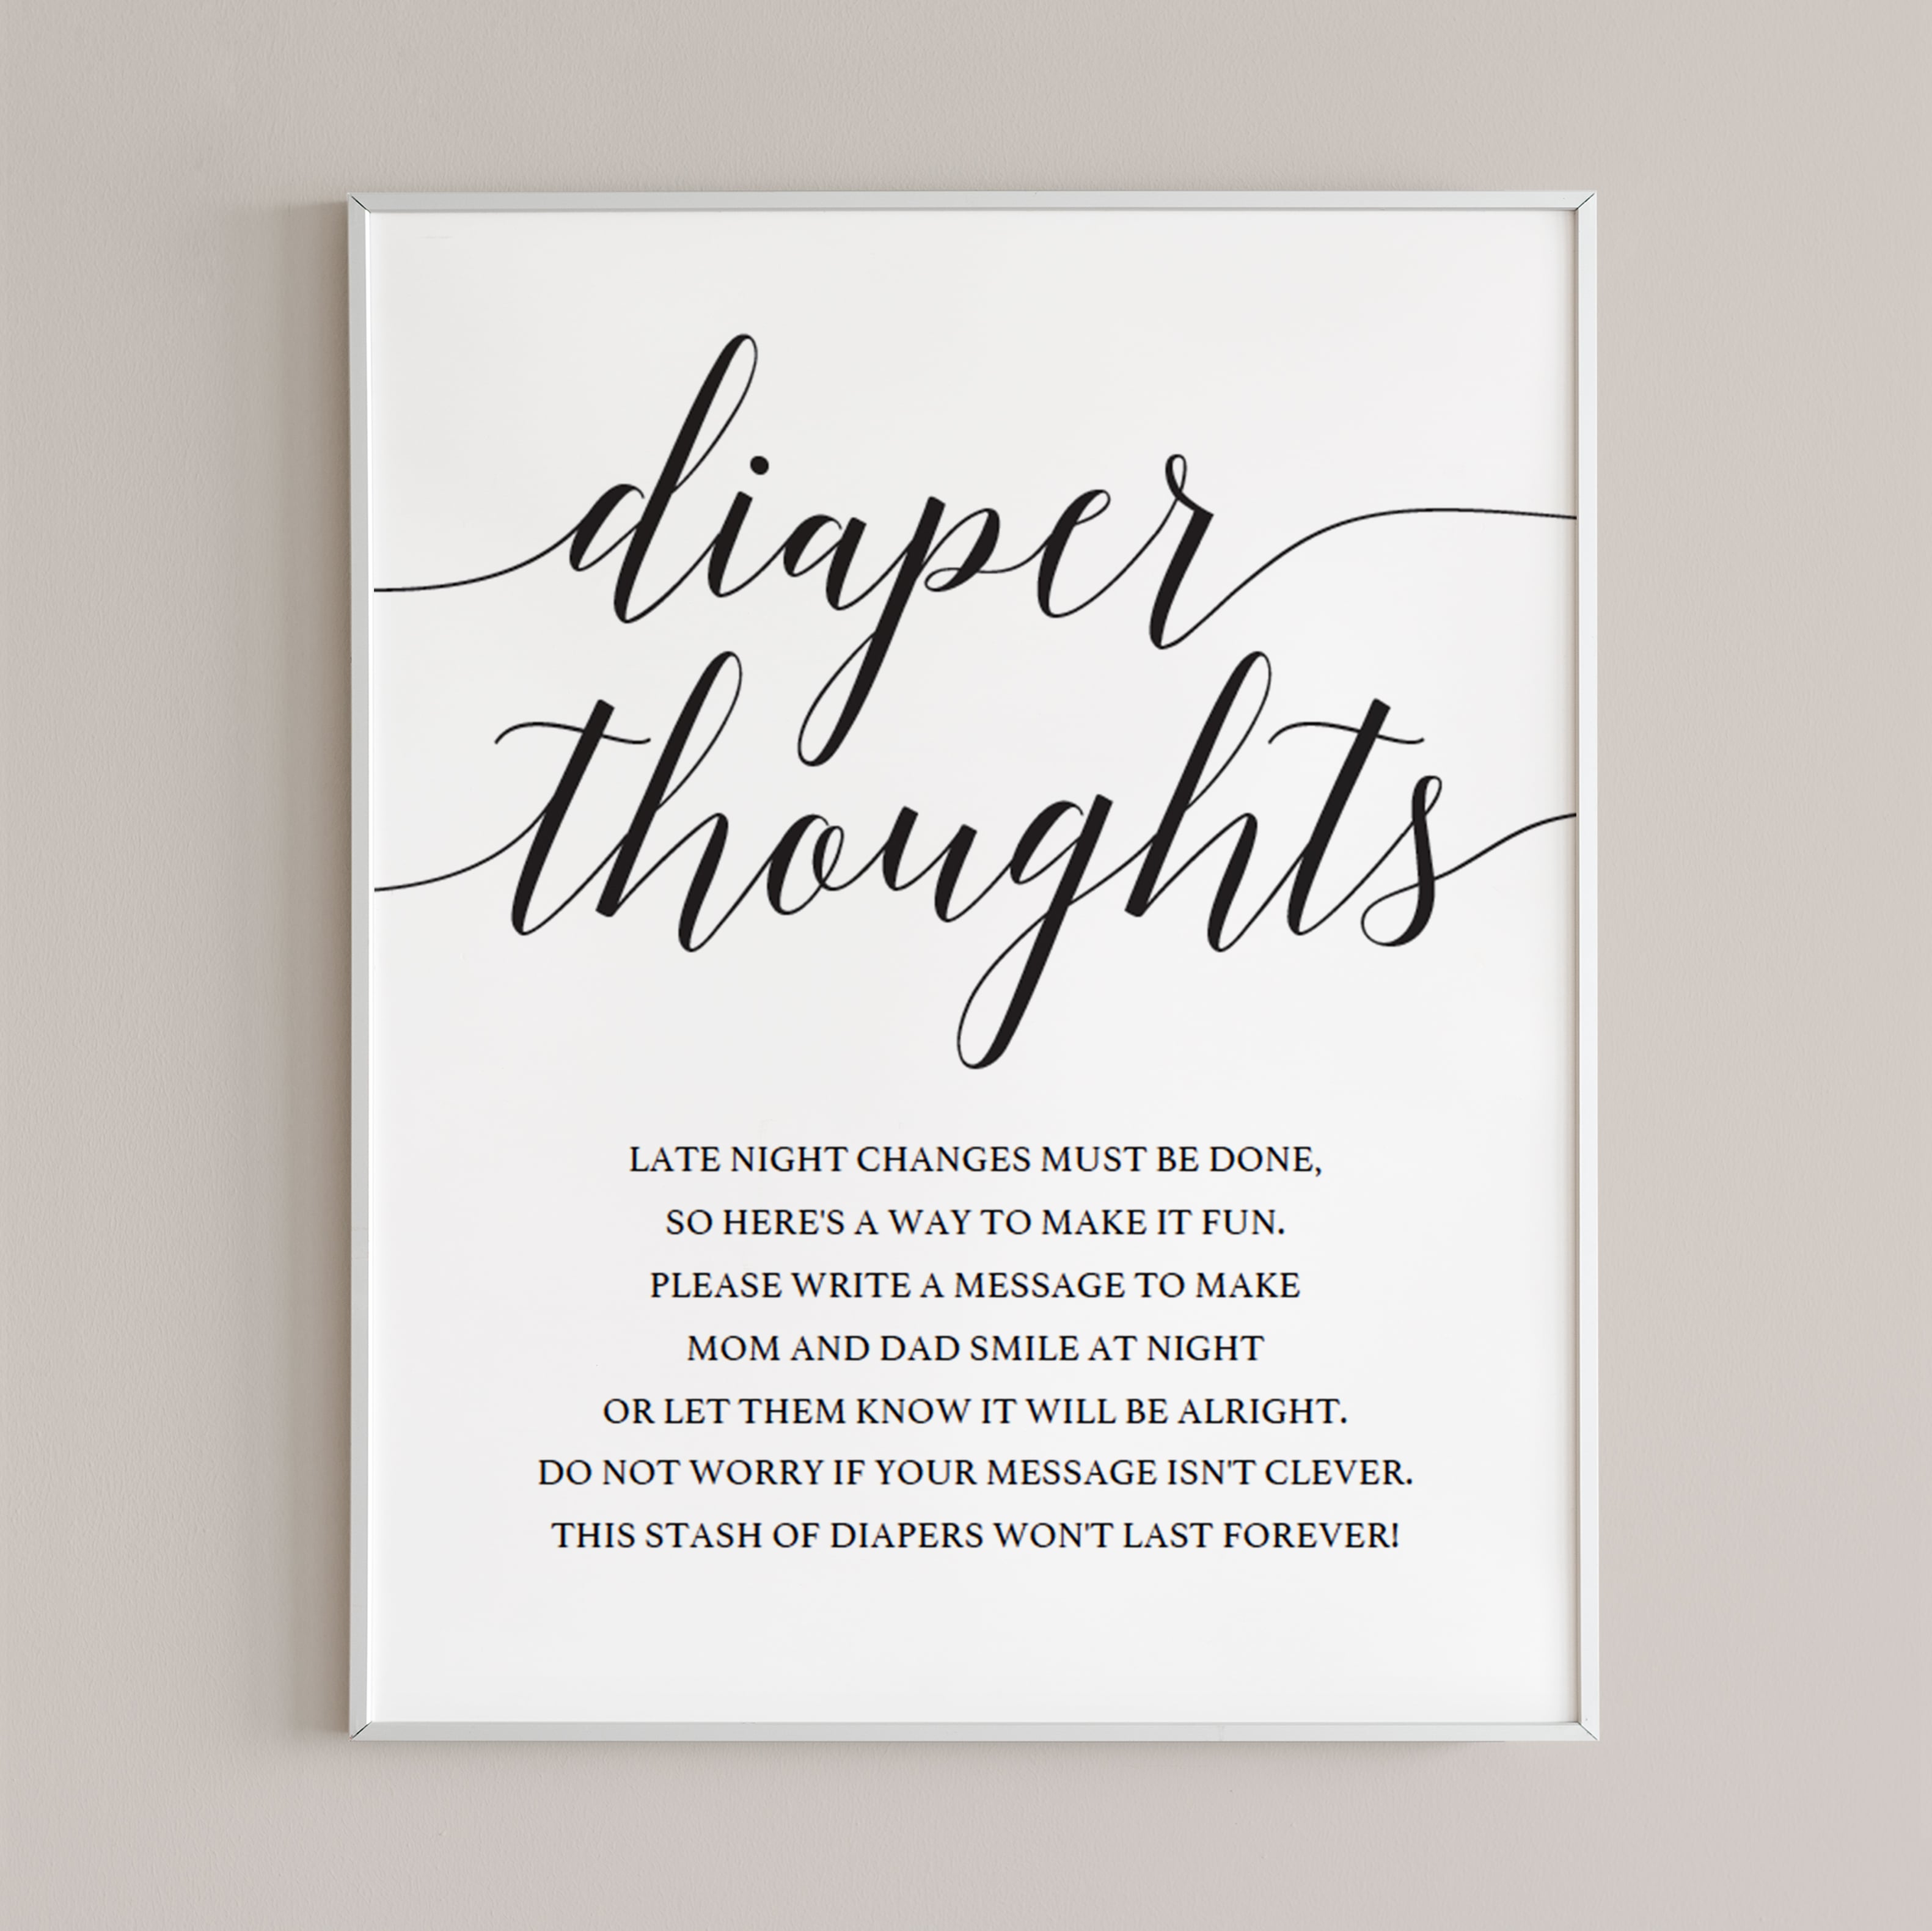 Diaper thoughts baby shower sign template by LittleSizzle